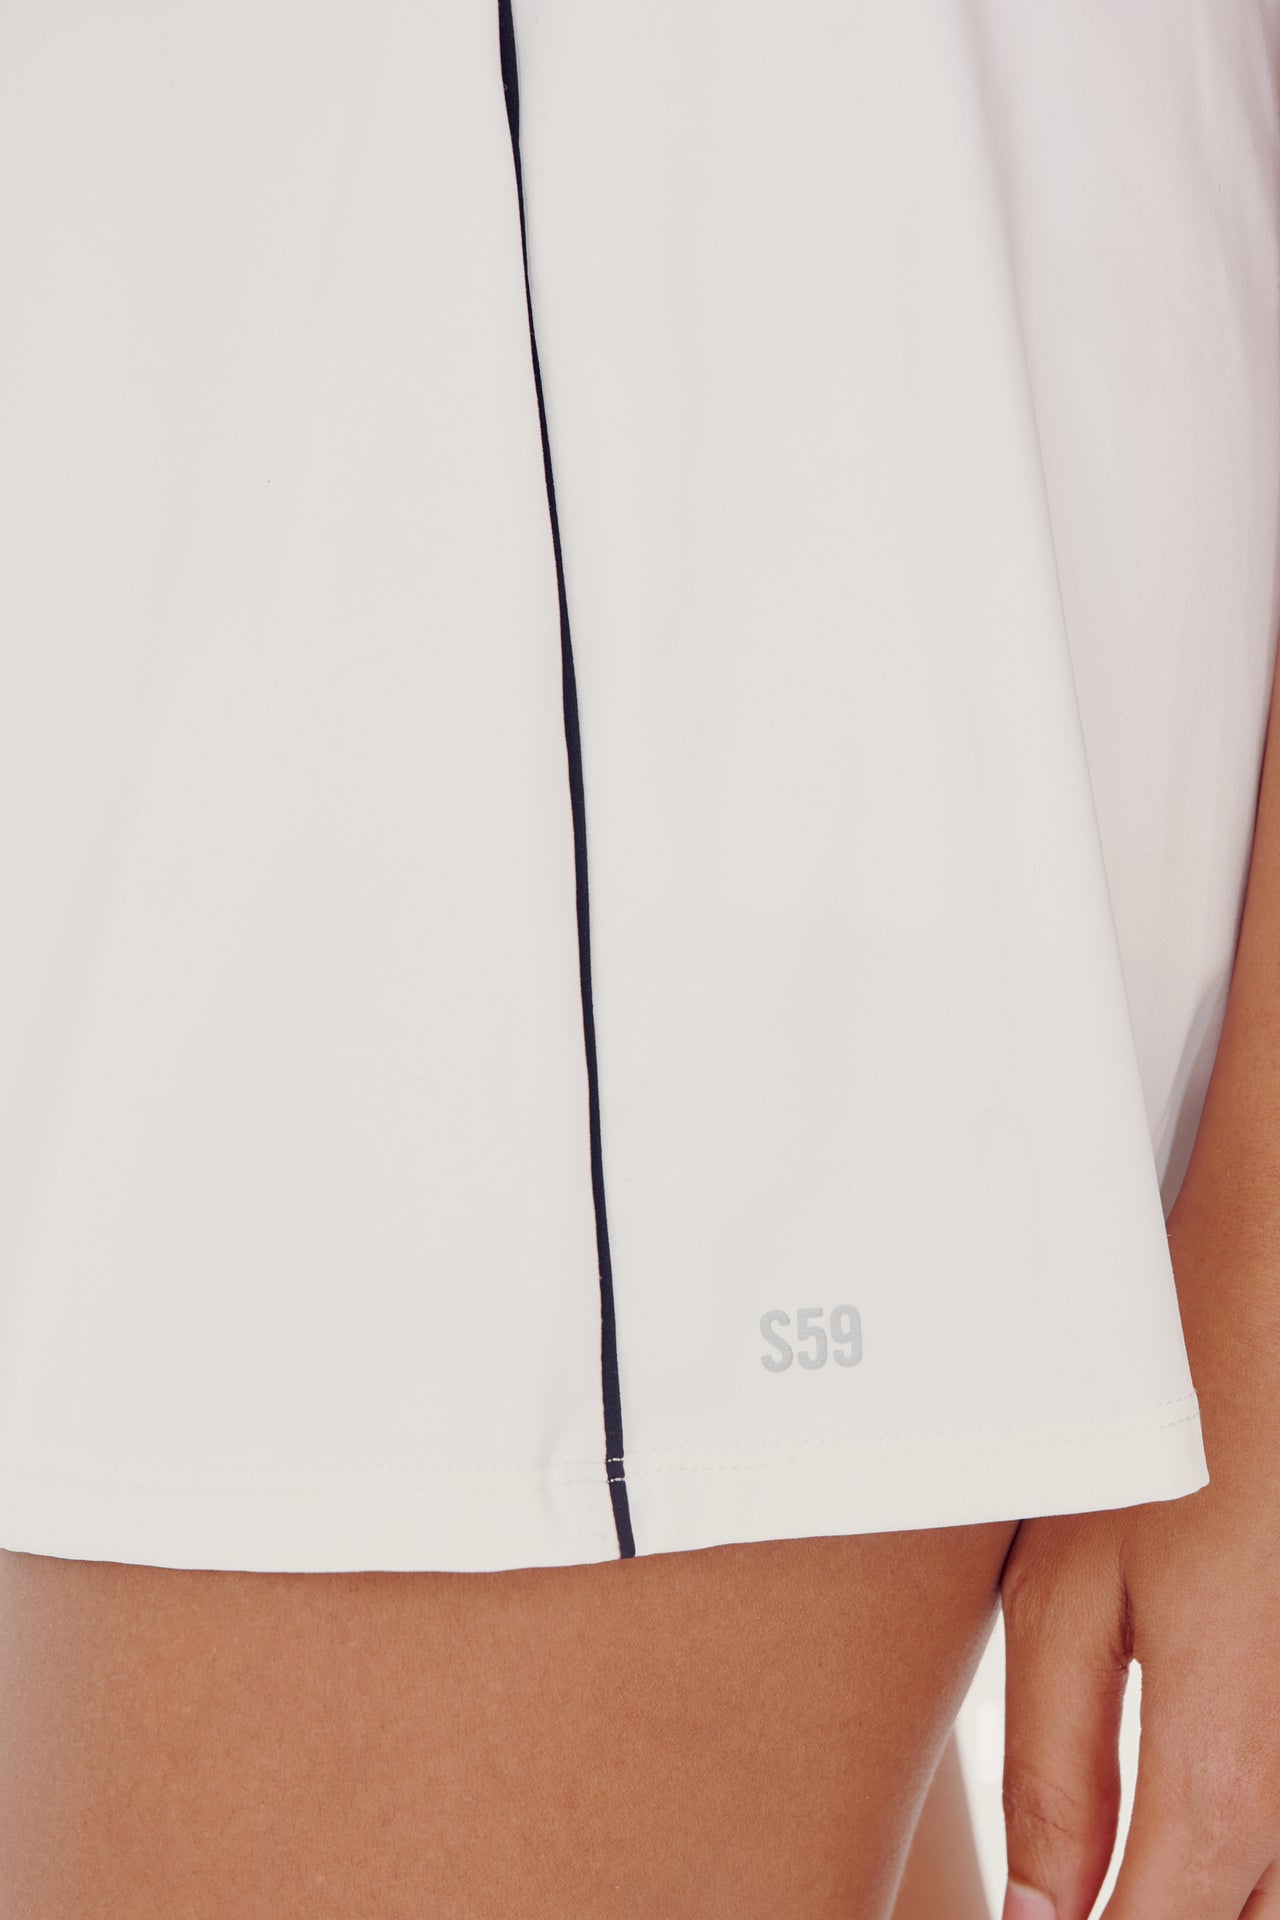 Close-up of a SPLITS59 Venus High Waist Rigor Skort w/Piping - White with a black side seam and the initials 